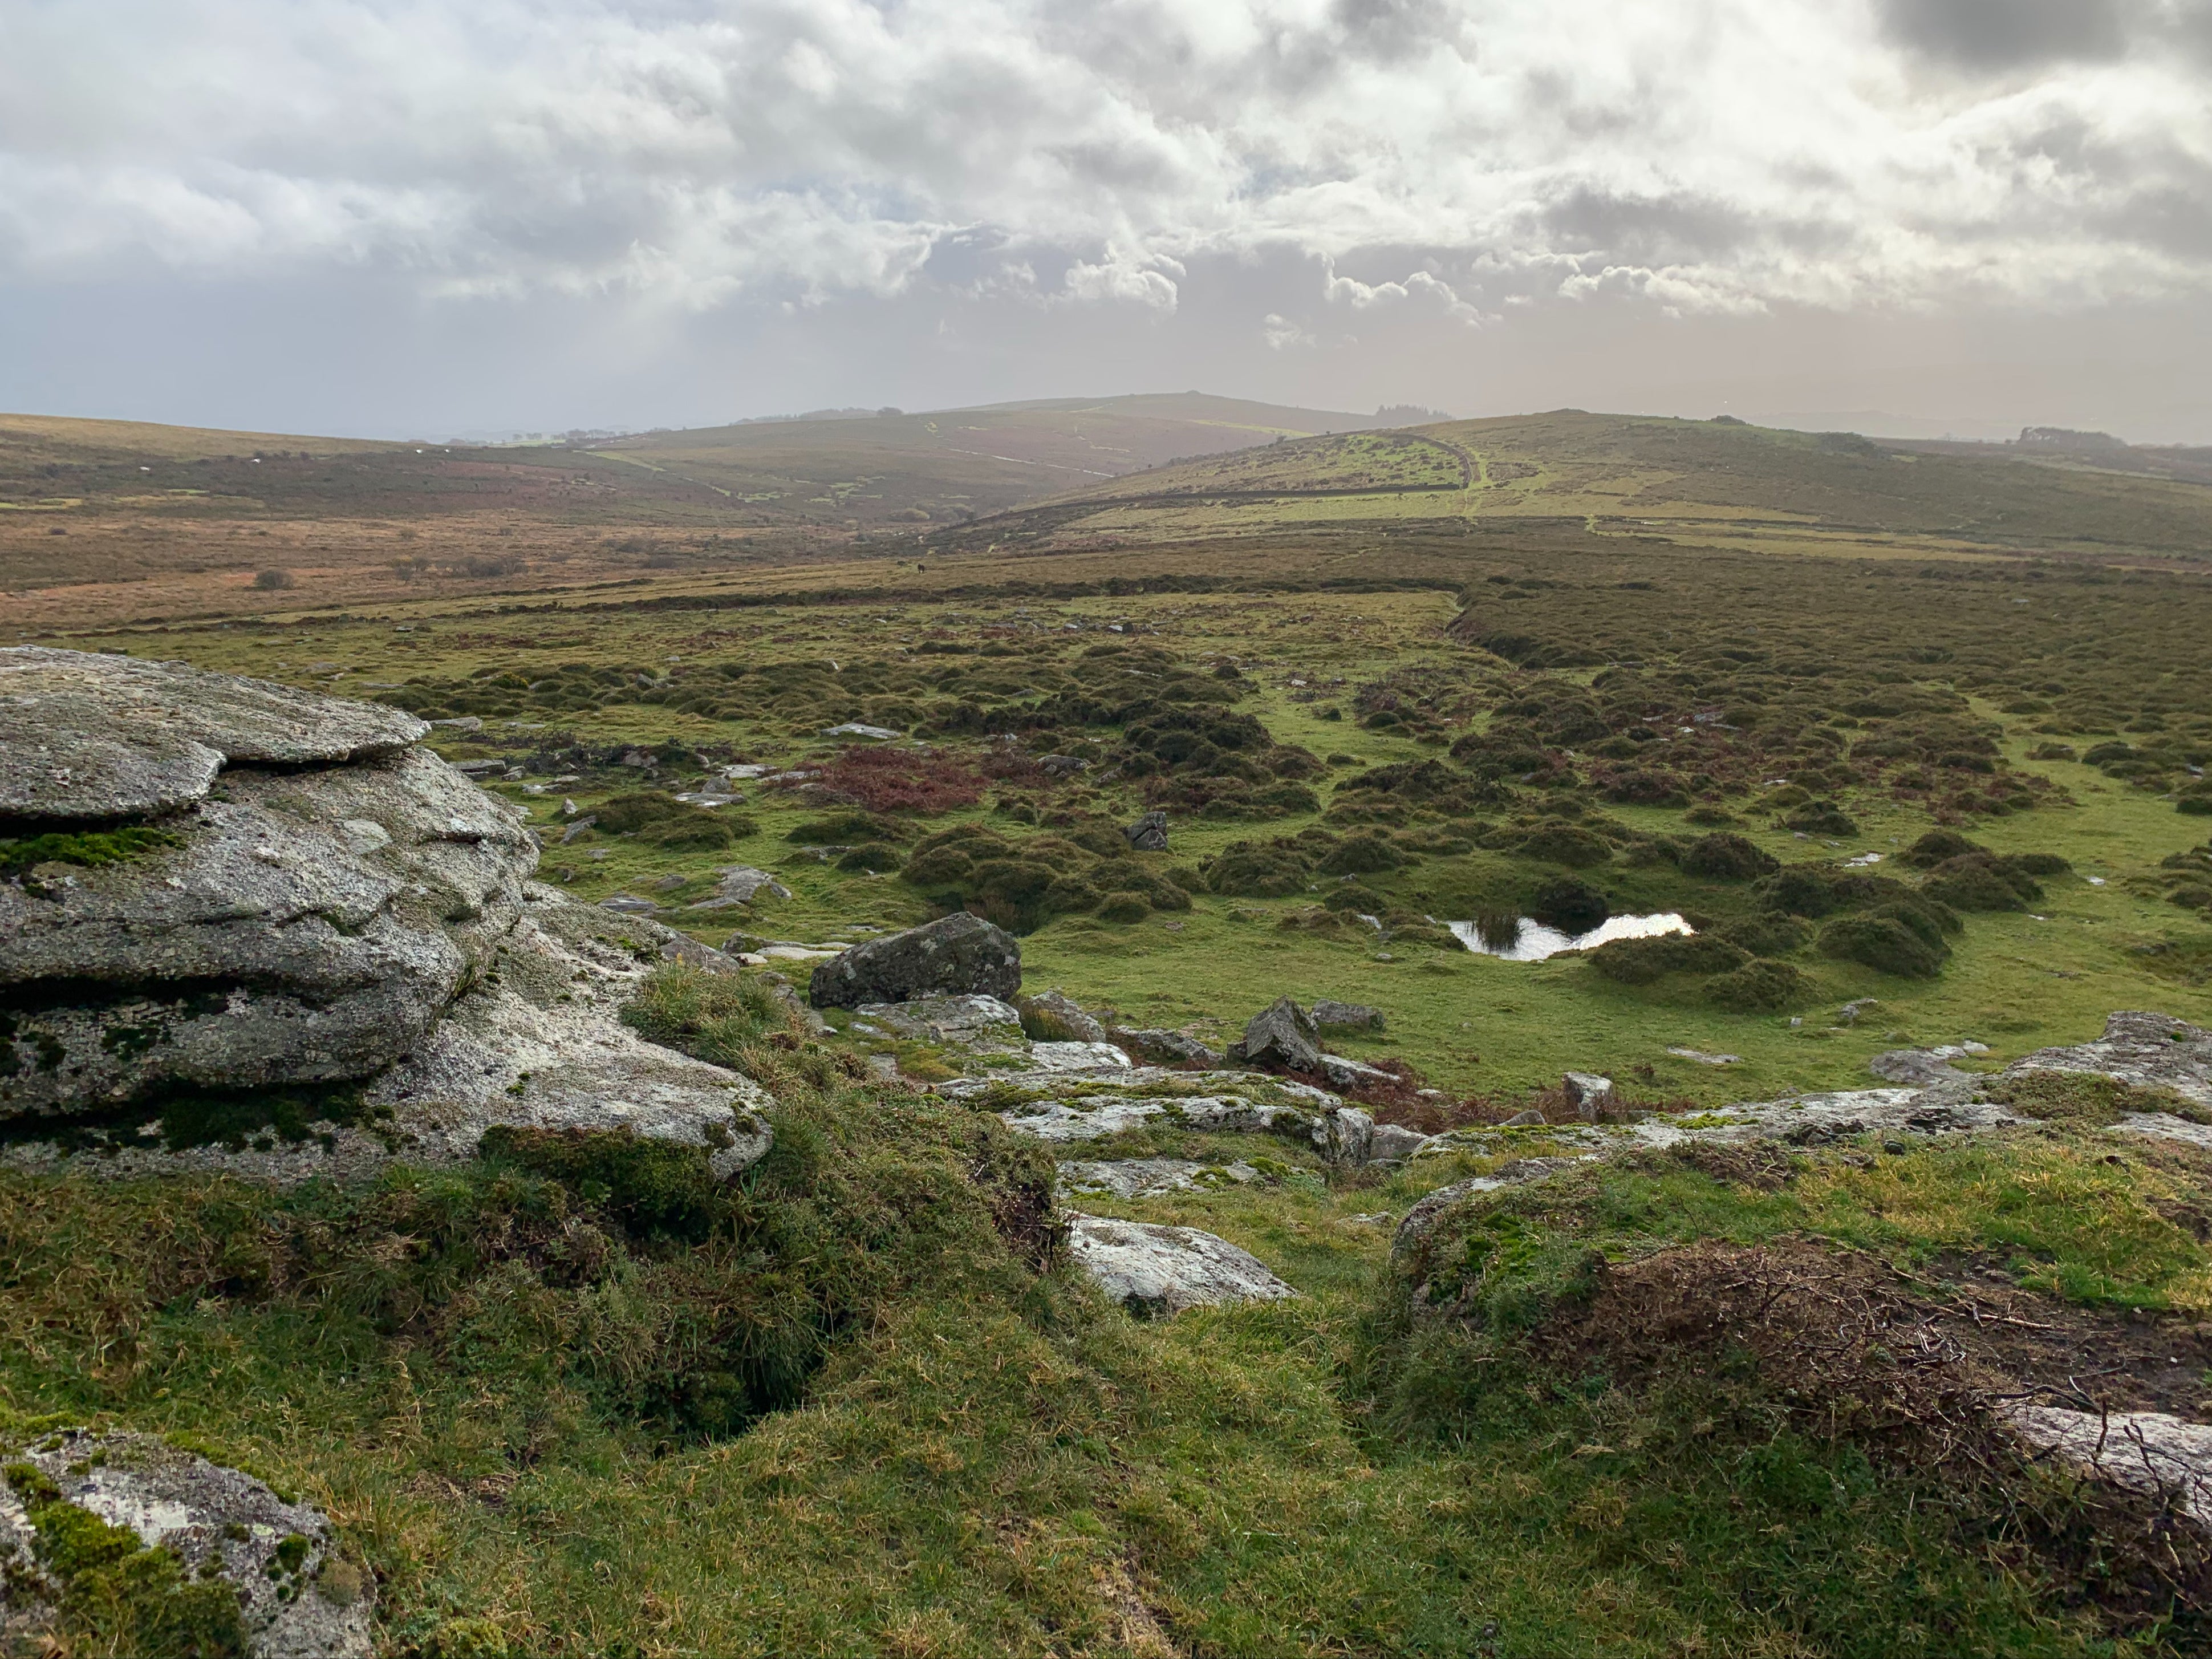 Dartmoor National Park is the only place in England where you can legally wild camp without a landowner’s permission